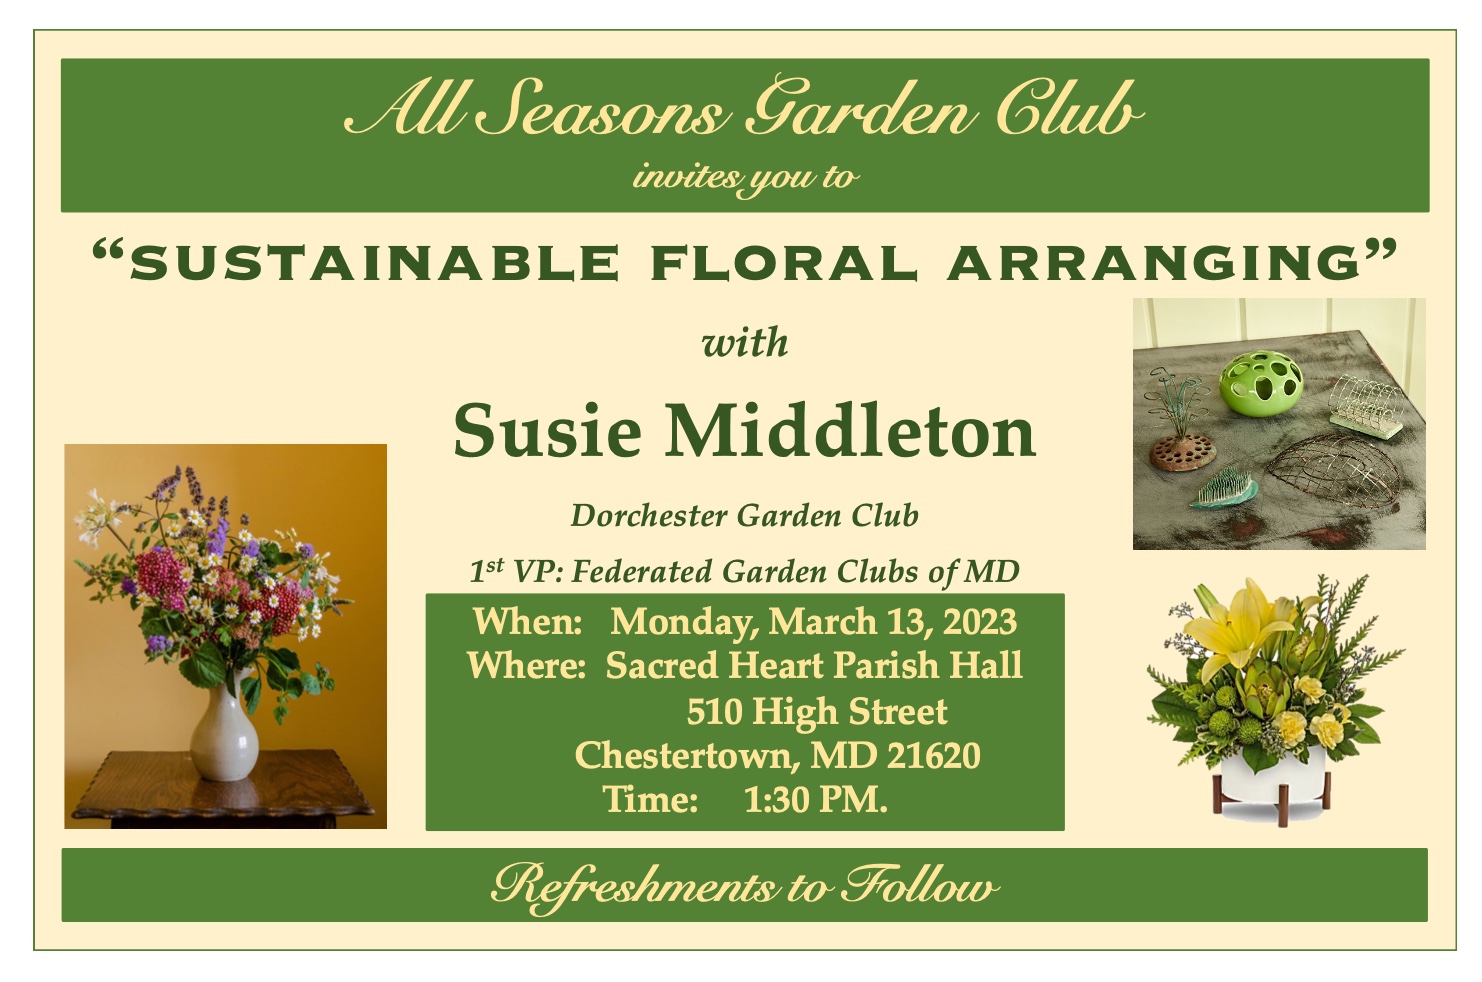 “Sustainable Floral Arranging” with Susie Middleton